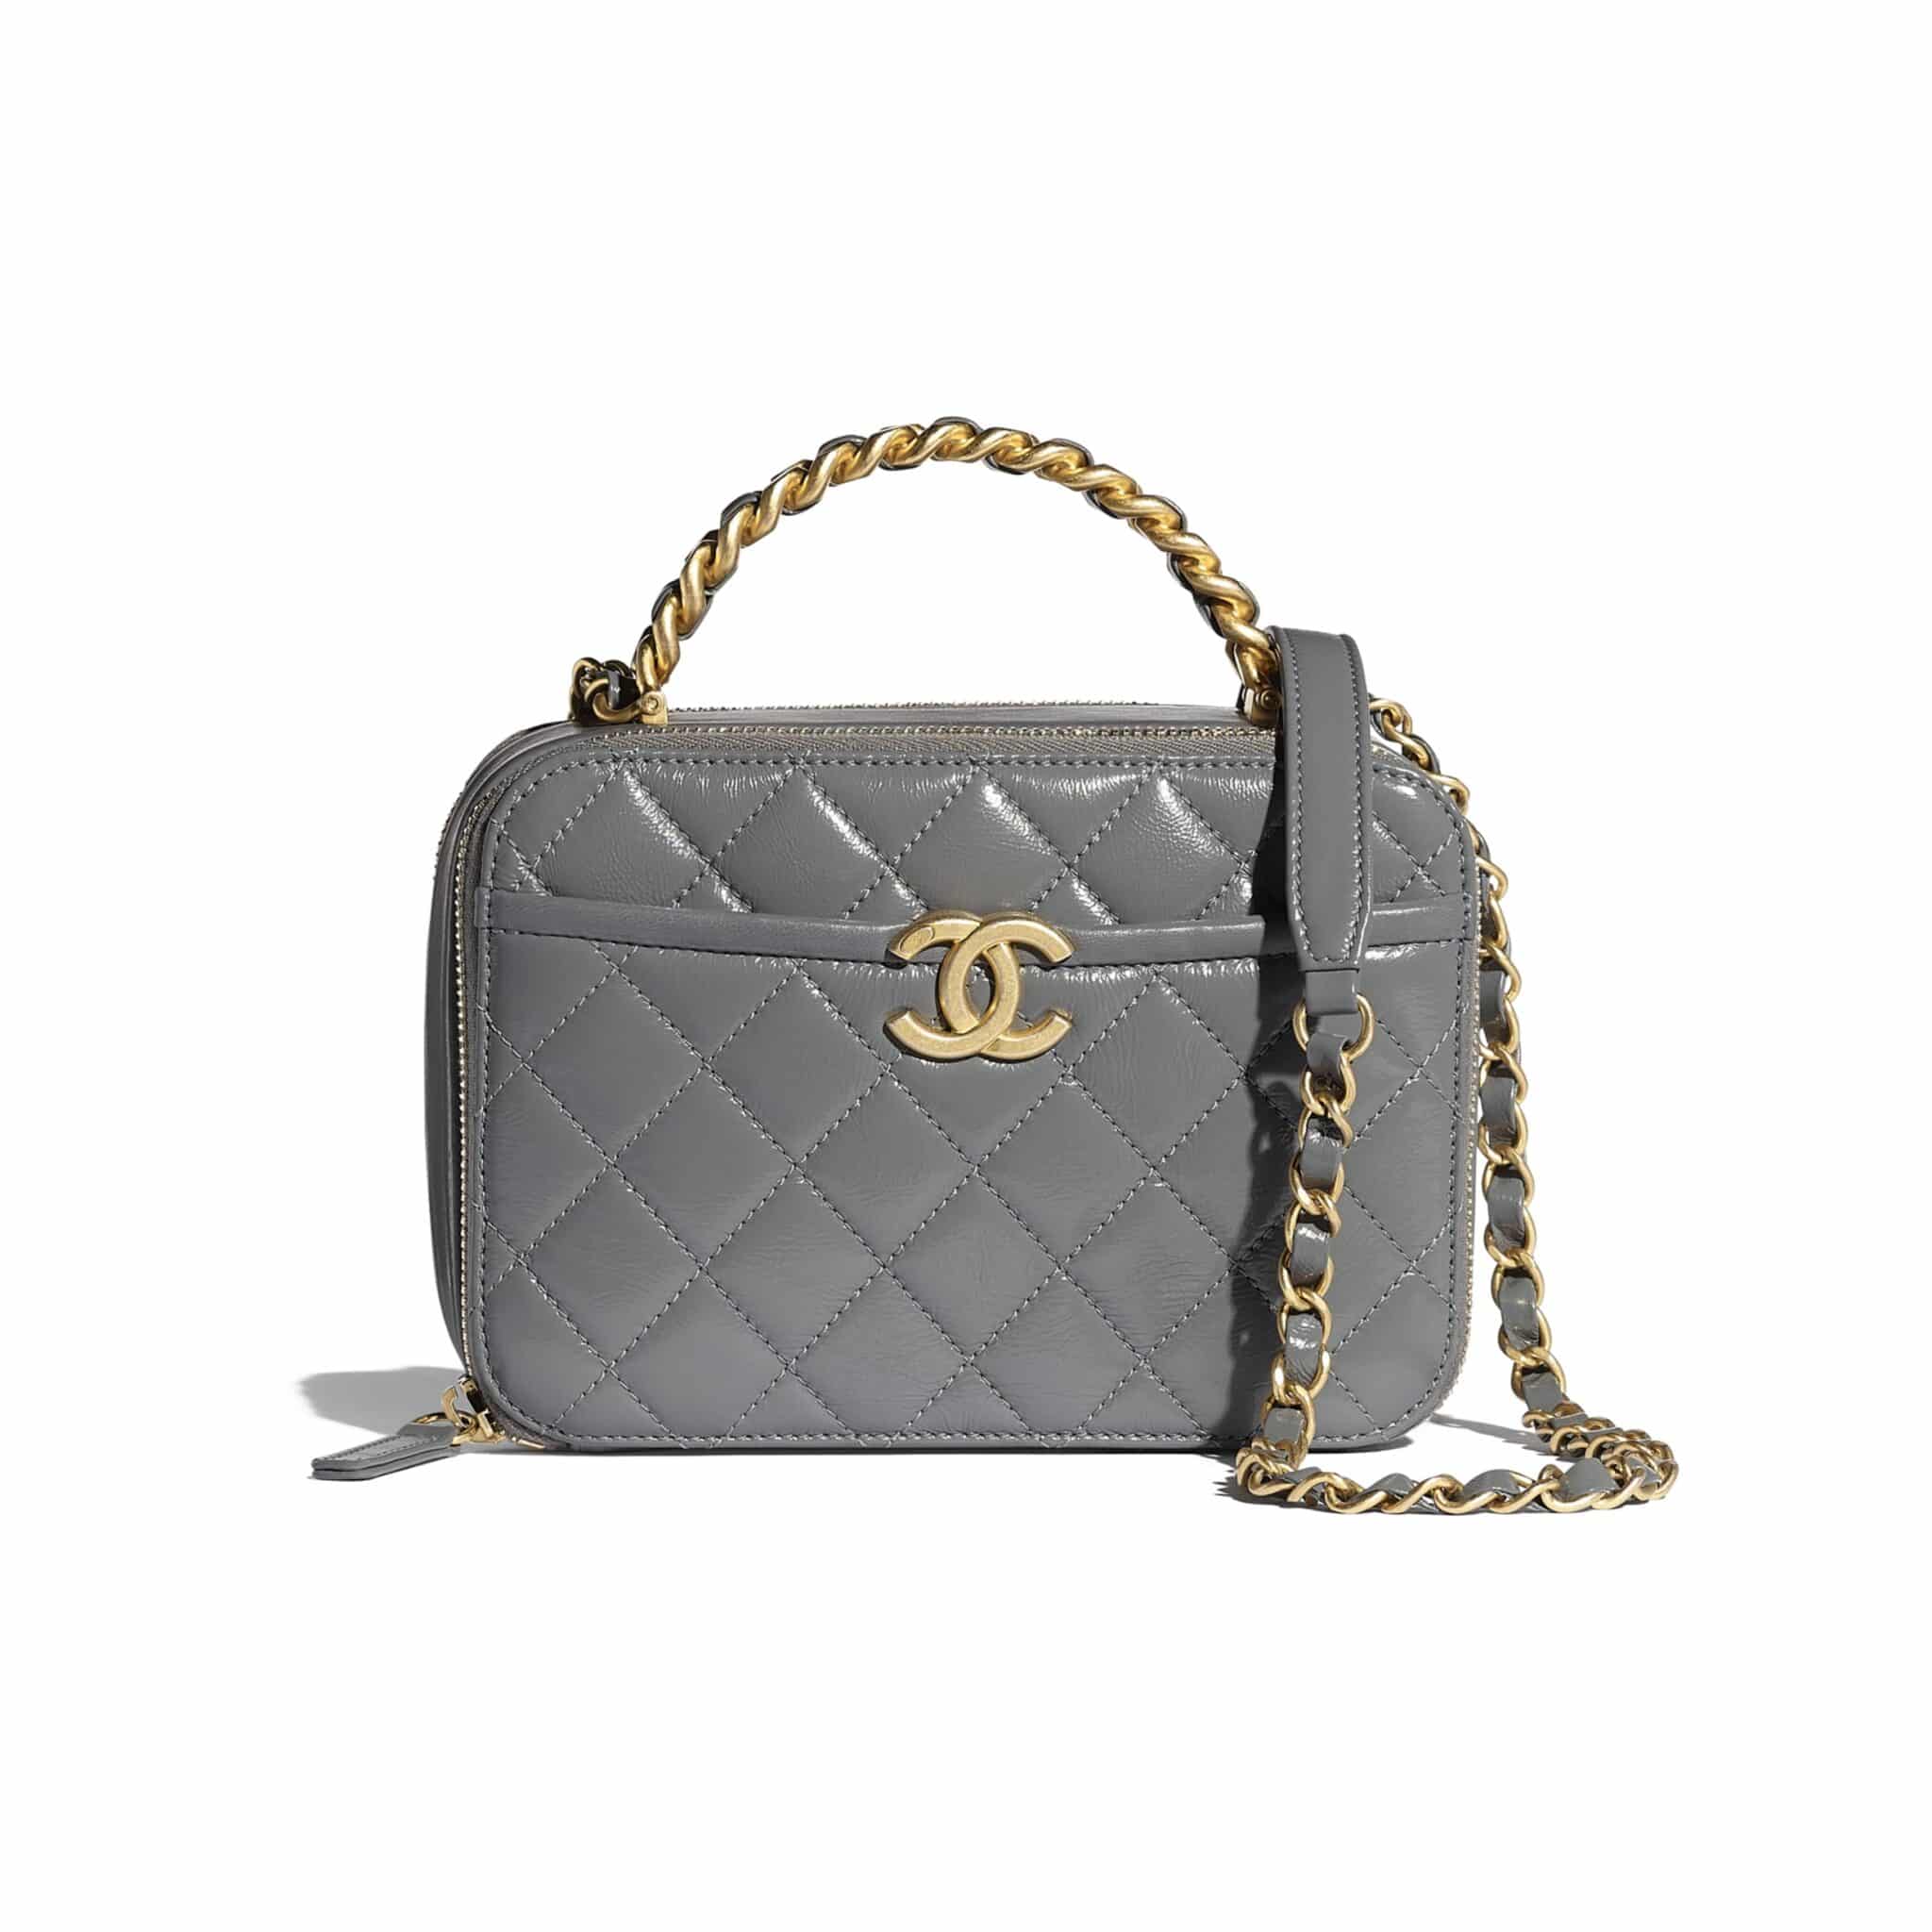 Chanel Shiny Calfskin Handbags and Small Leather Goods - Spotted